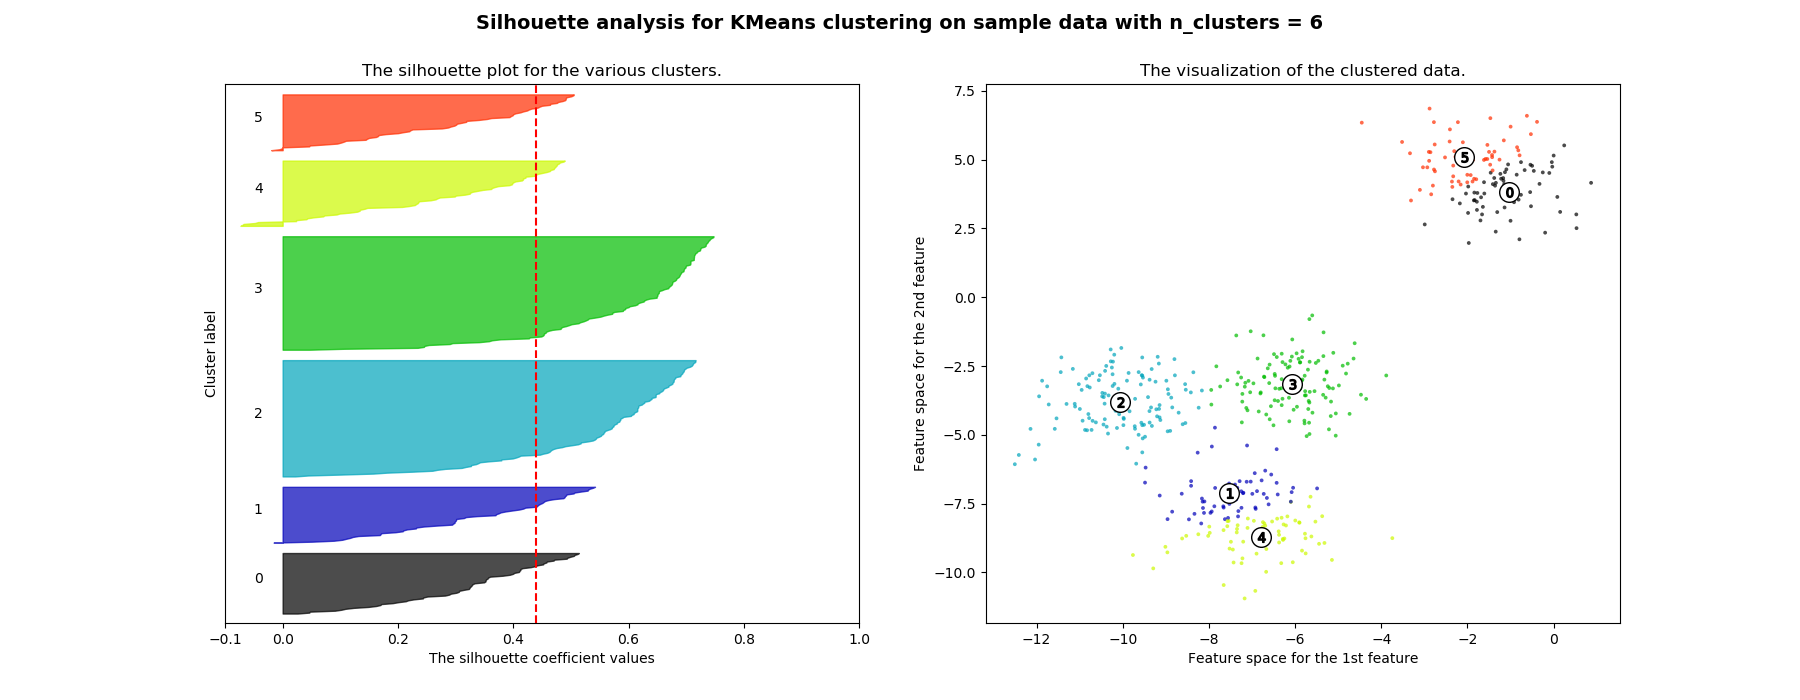 ../../_images/sphx_glr_plot_kmeans_silhouette_analysis_005.png